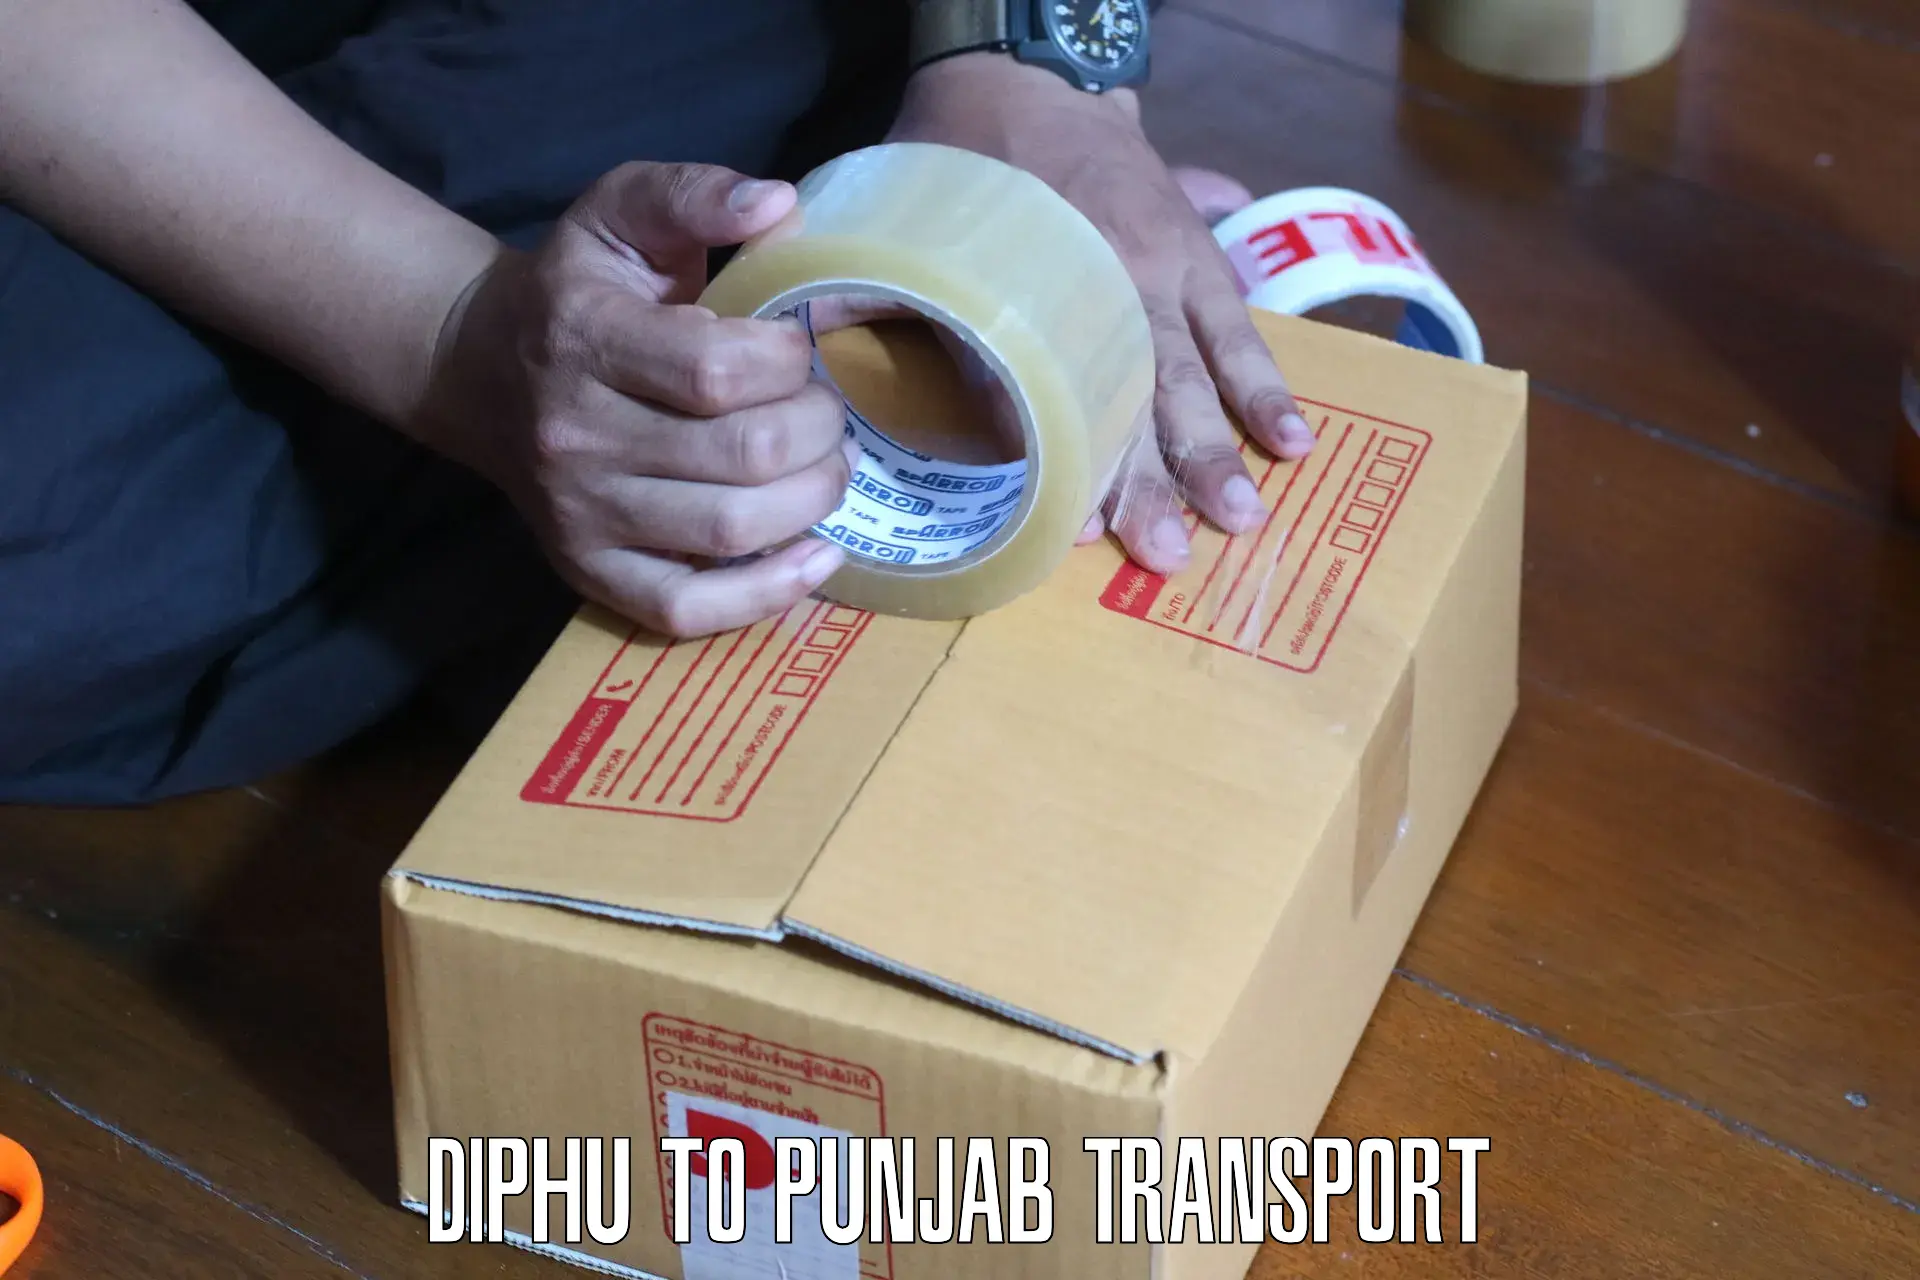 Delivery service Diphu to Phillaur